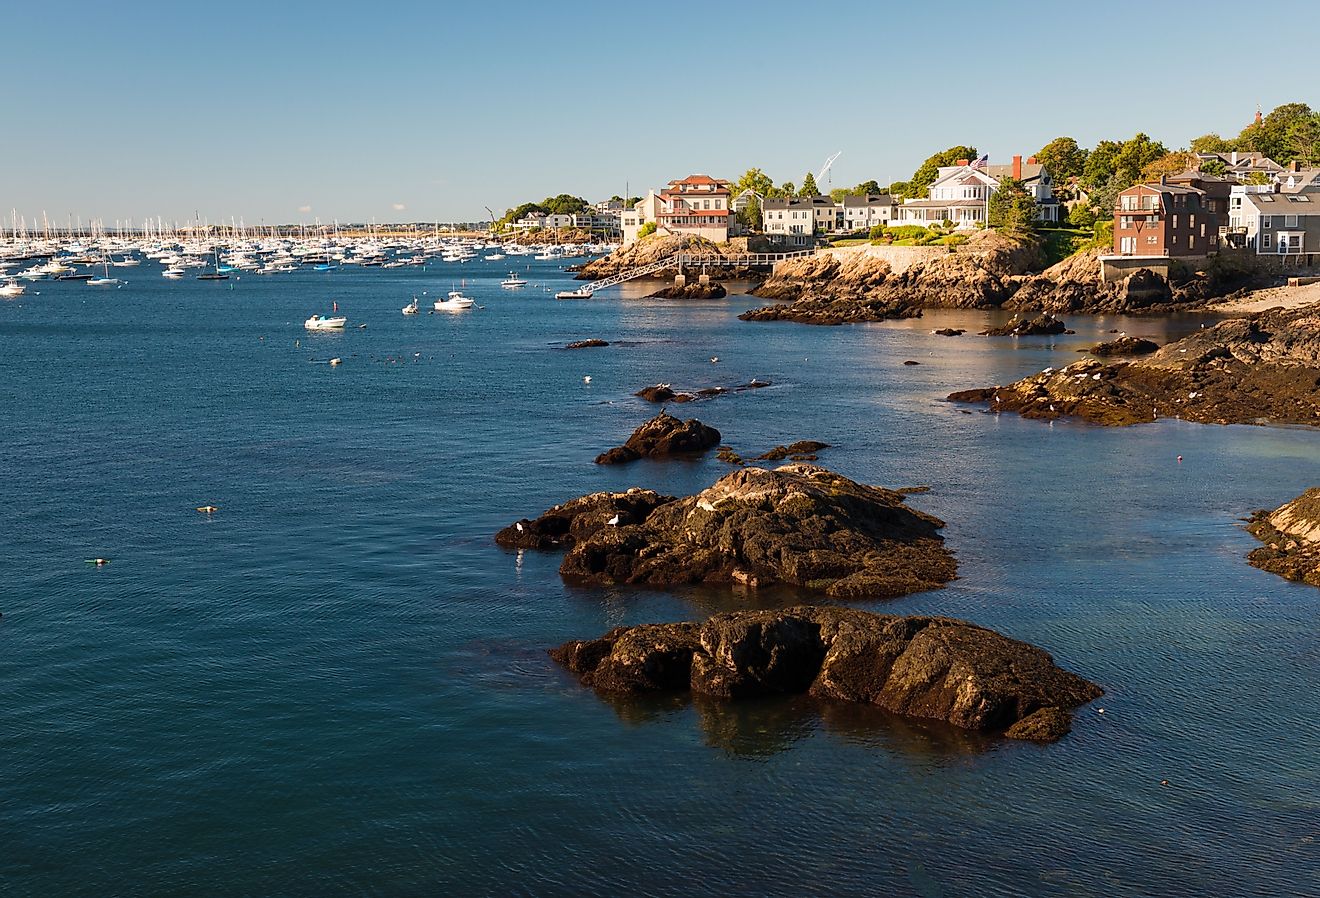 A scenic view of the beautiful town of Marblehead, MA, USA